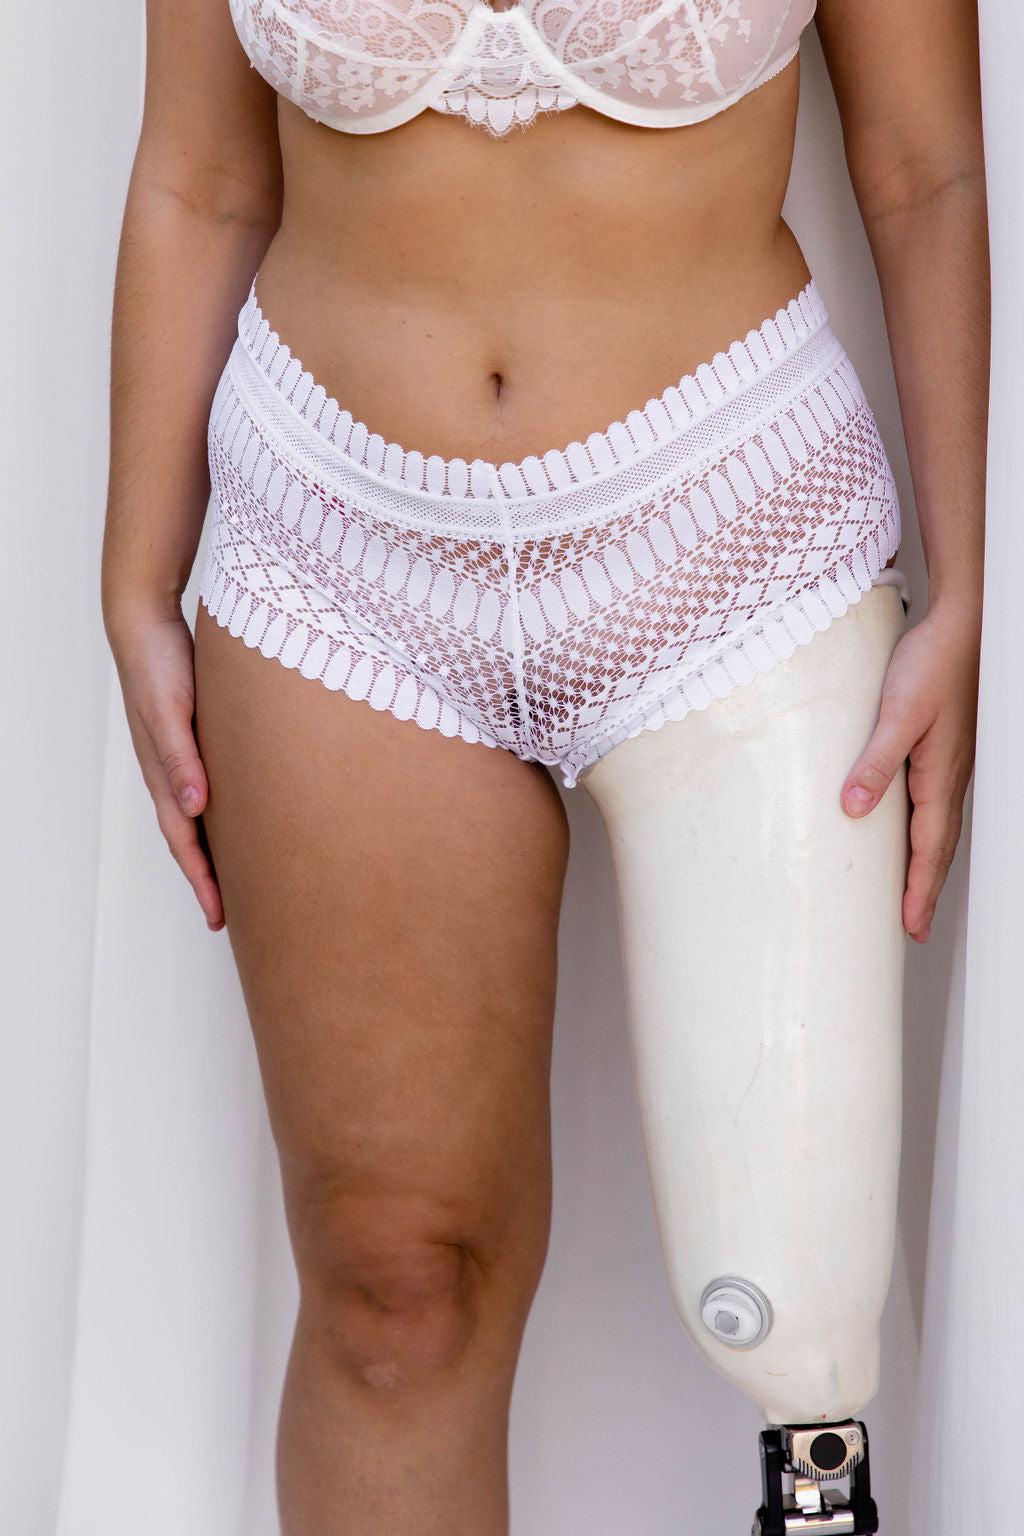 Periwinkle White Lace Brief Shorts - $9.00 - Corsets - Naked Curve